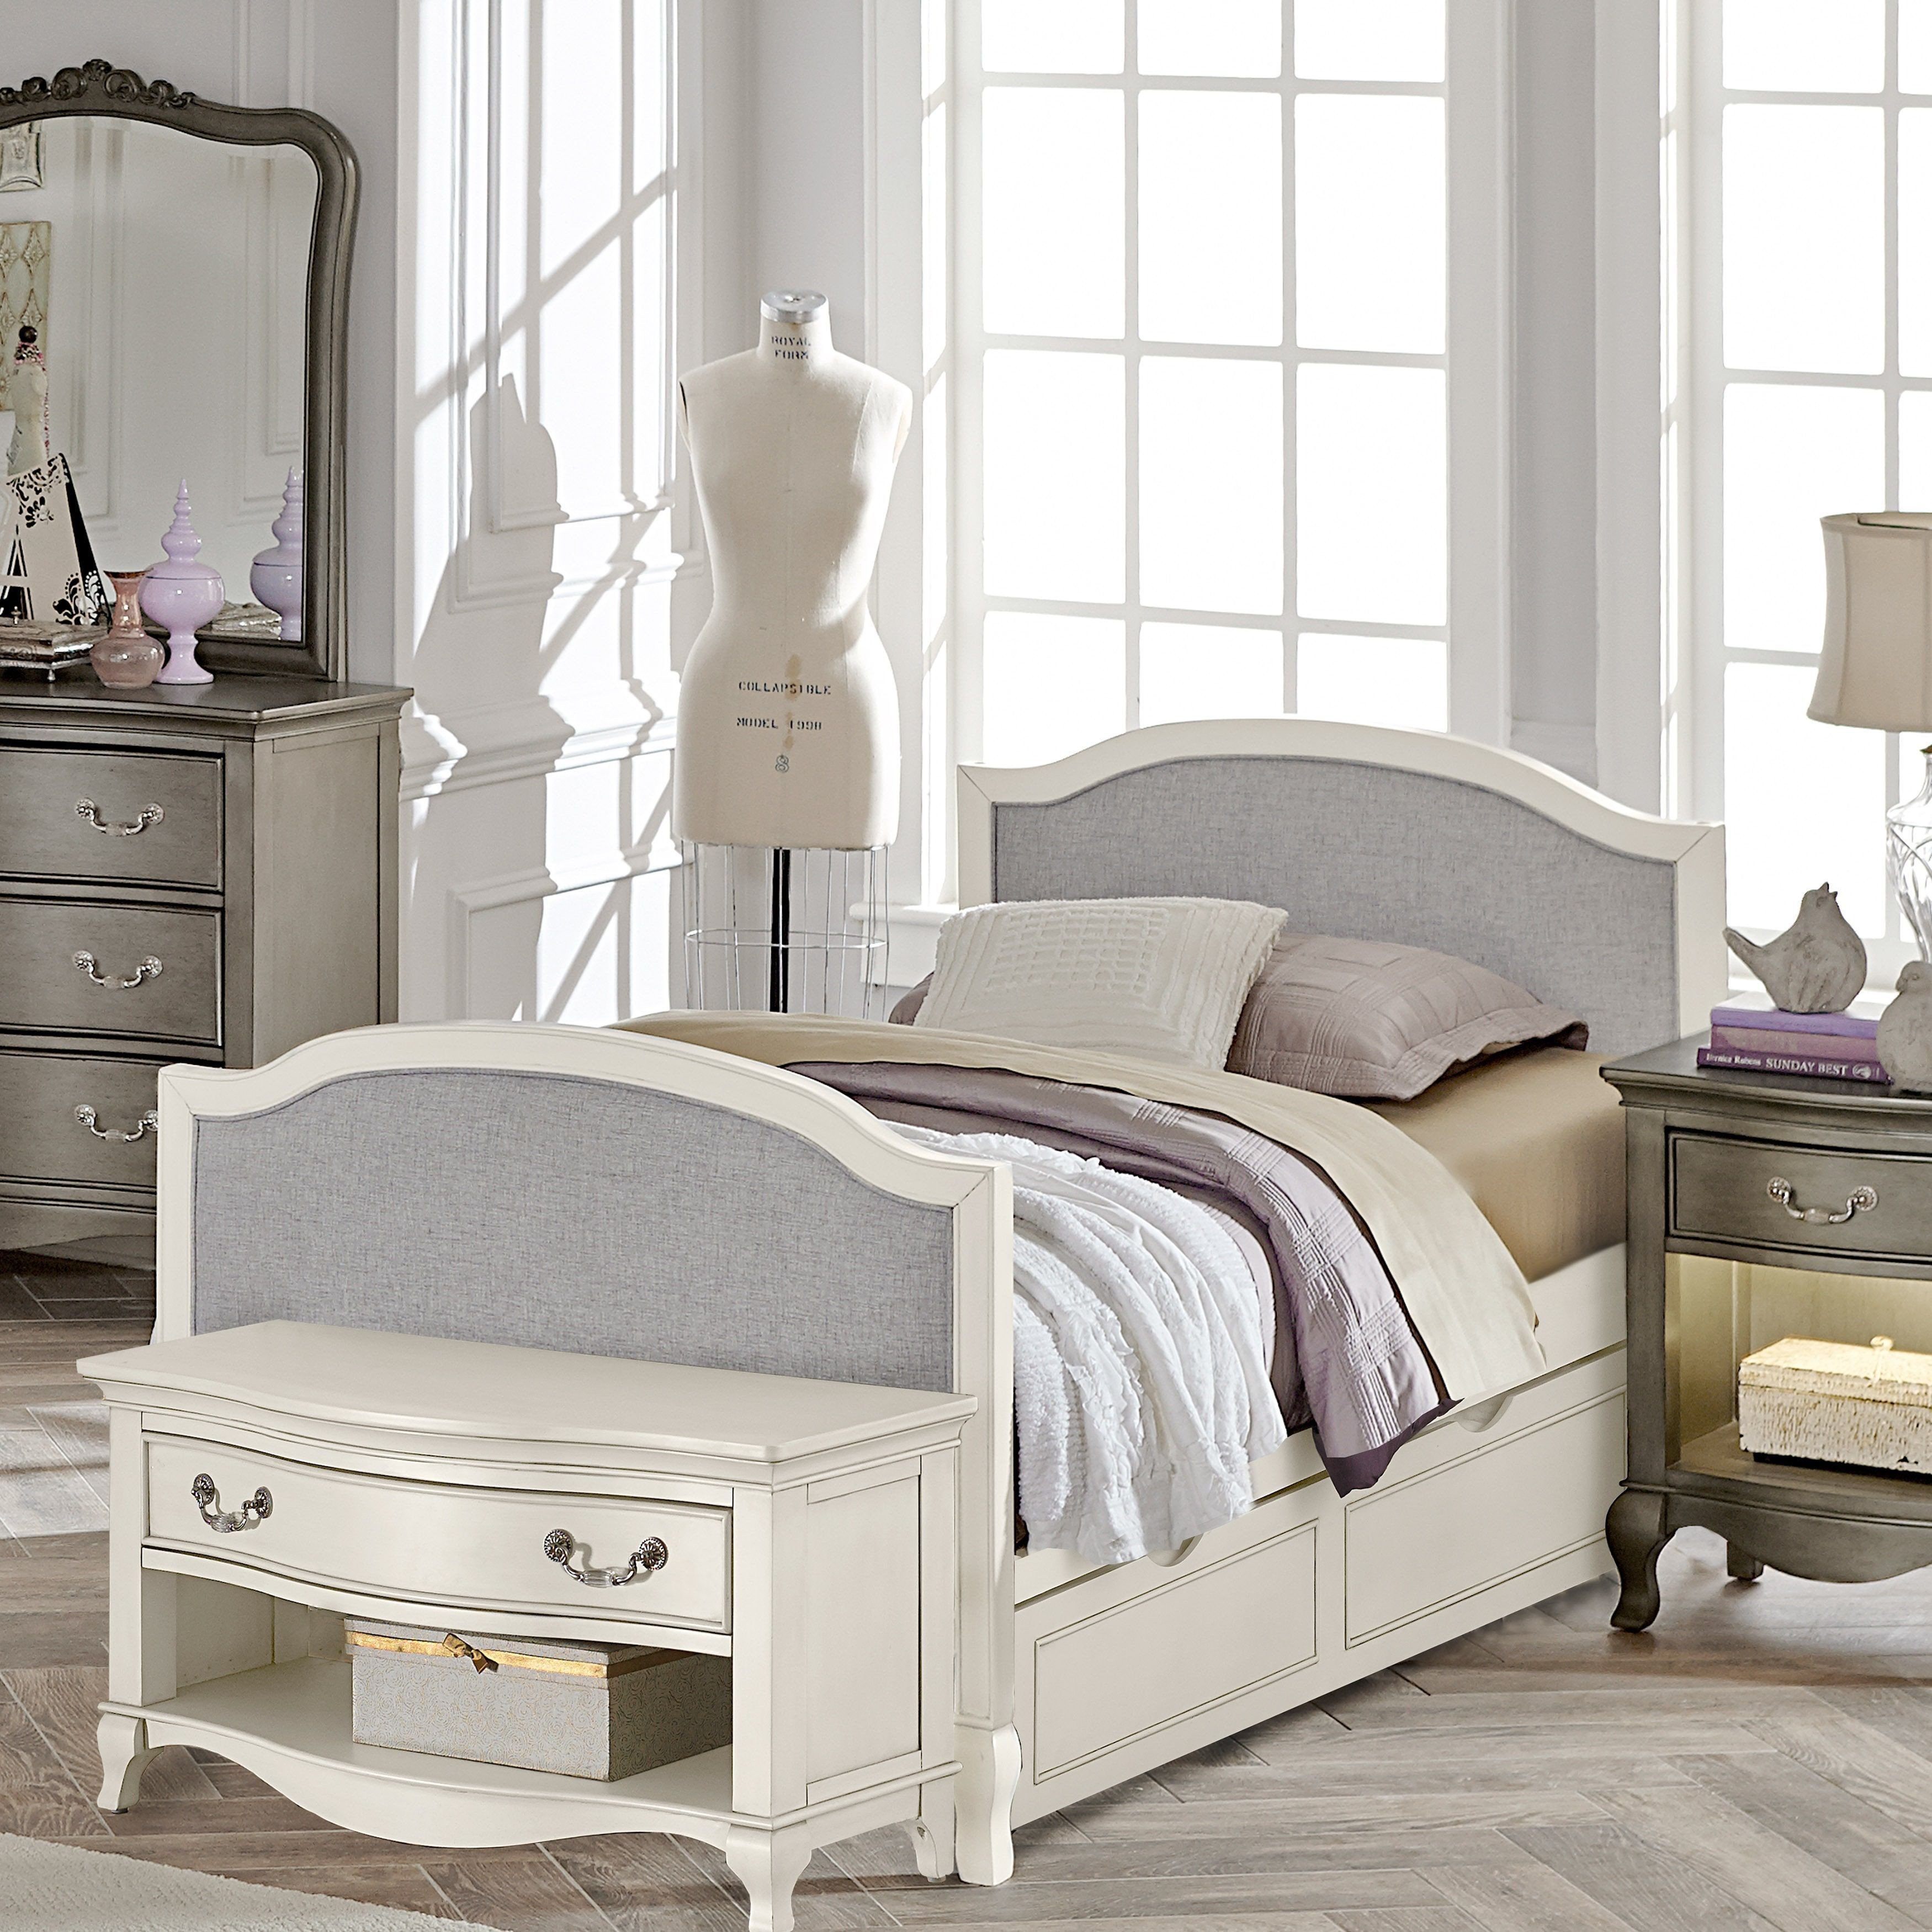 Cheap Twin Bedroom Set Fresh Kensington Victoria Antique White Twin Size Upholstered